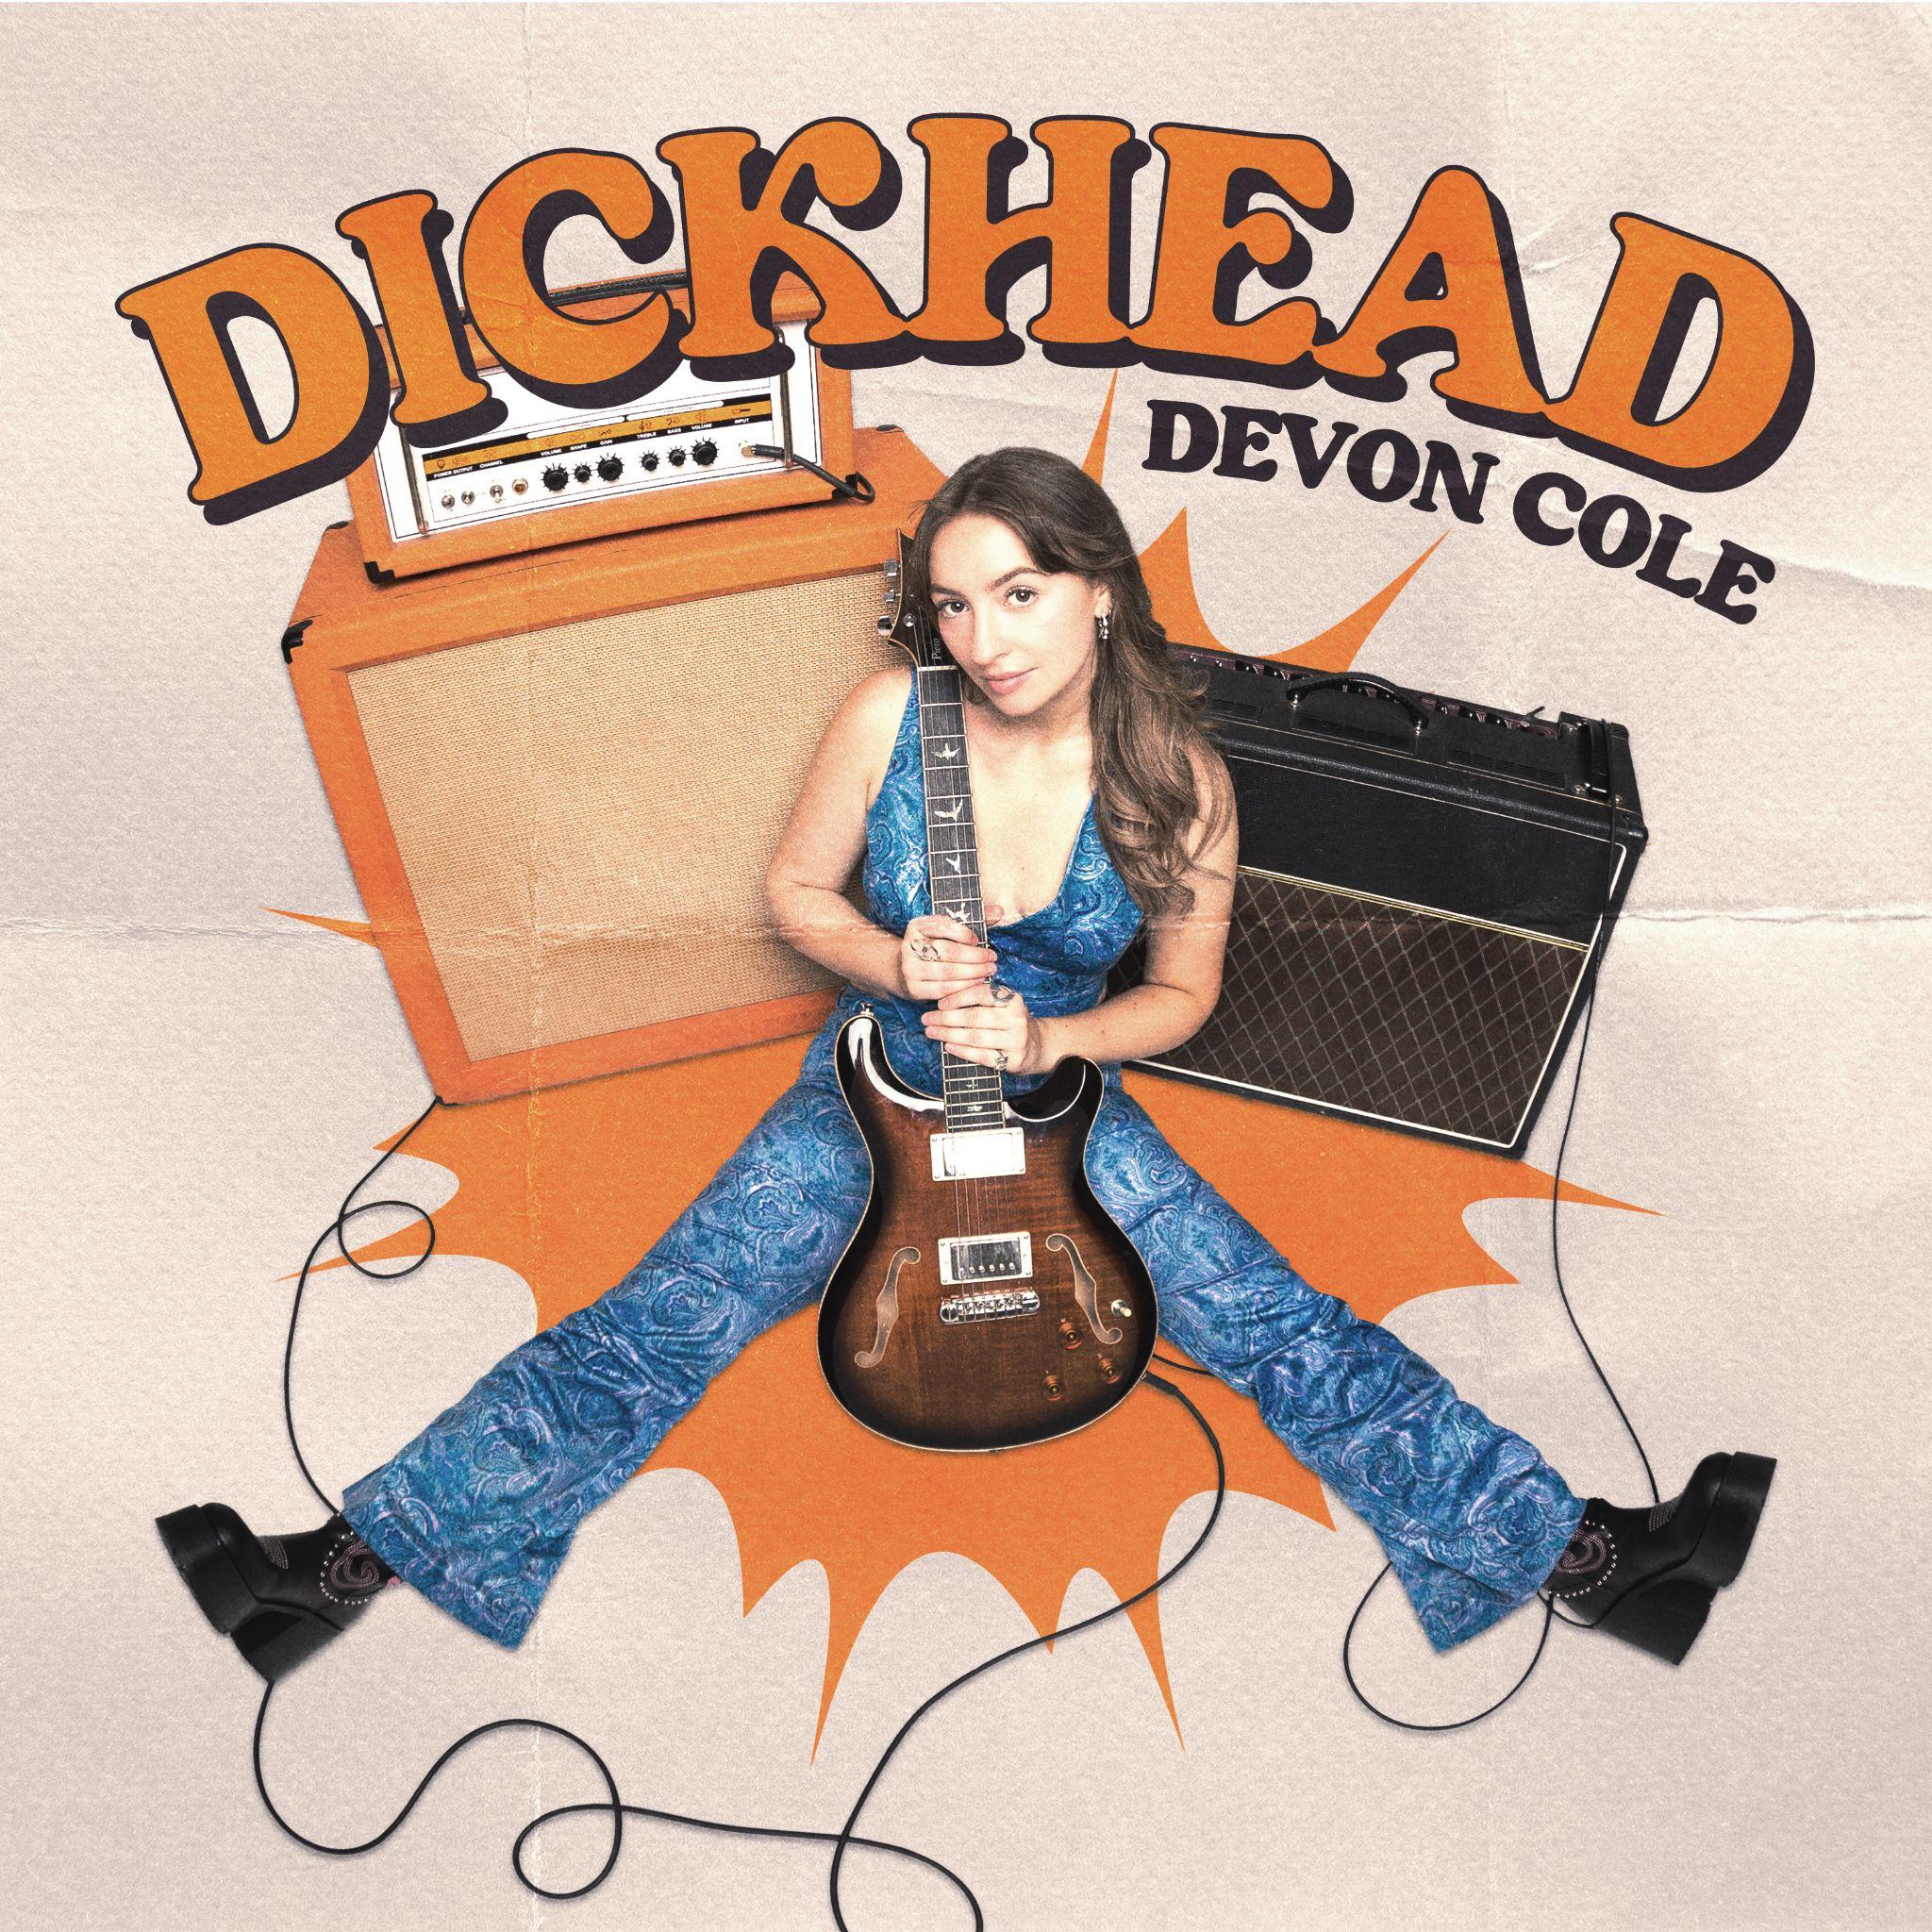 You are currently viewing Track of the Week: ‘Dickhead’ by Devon Cole